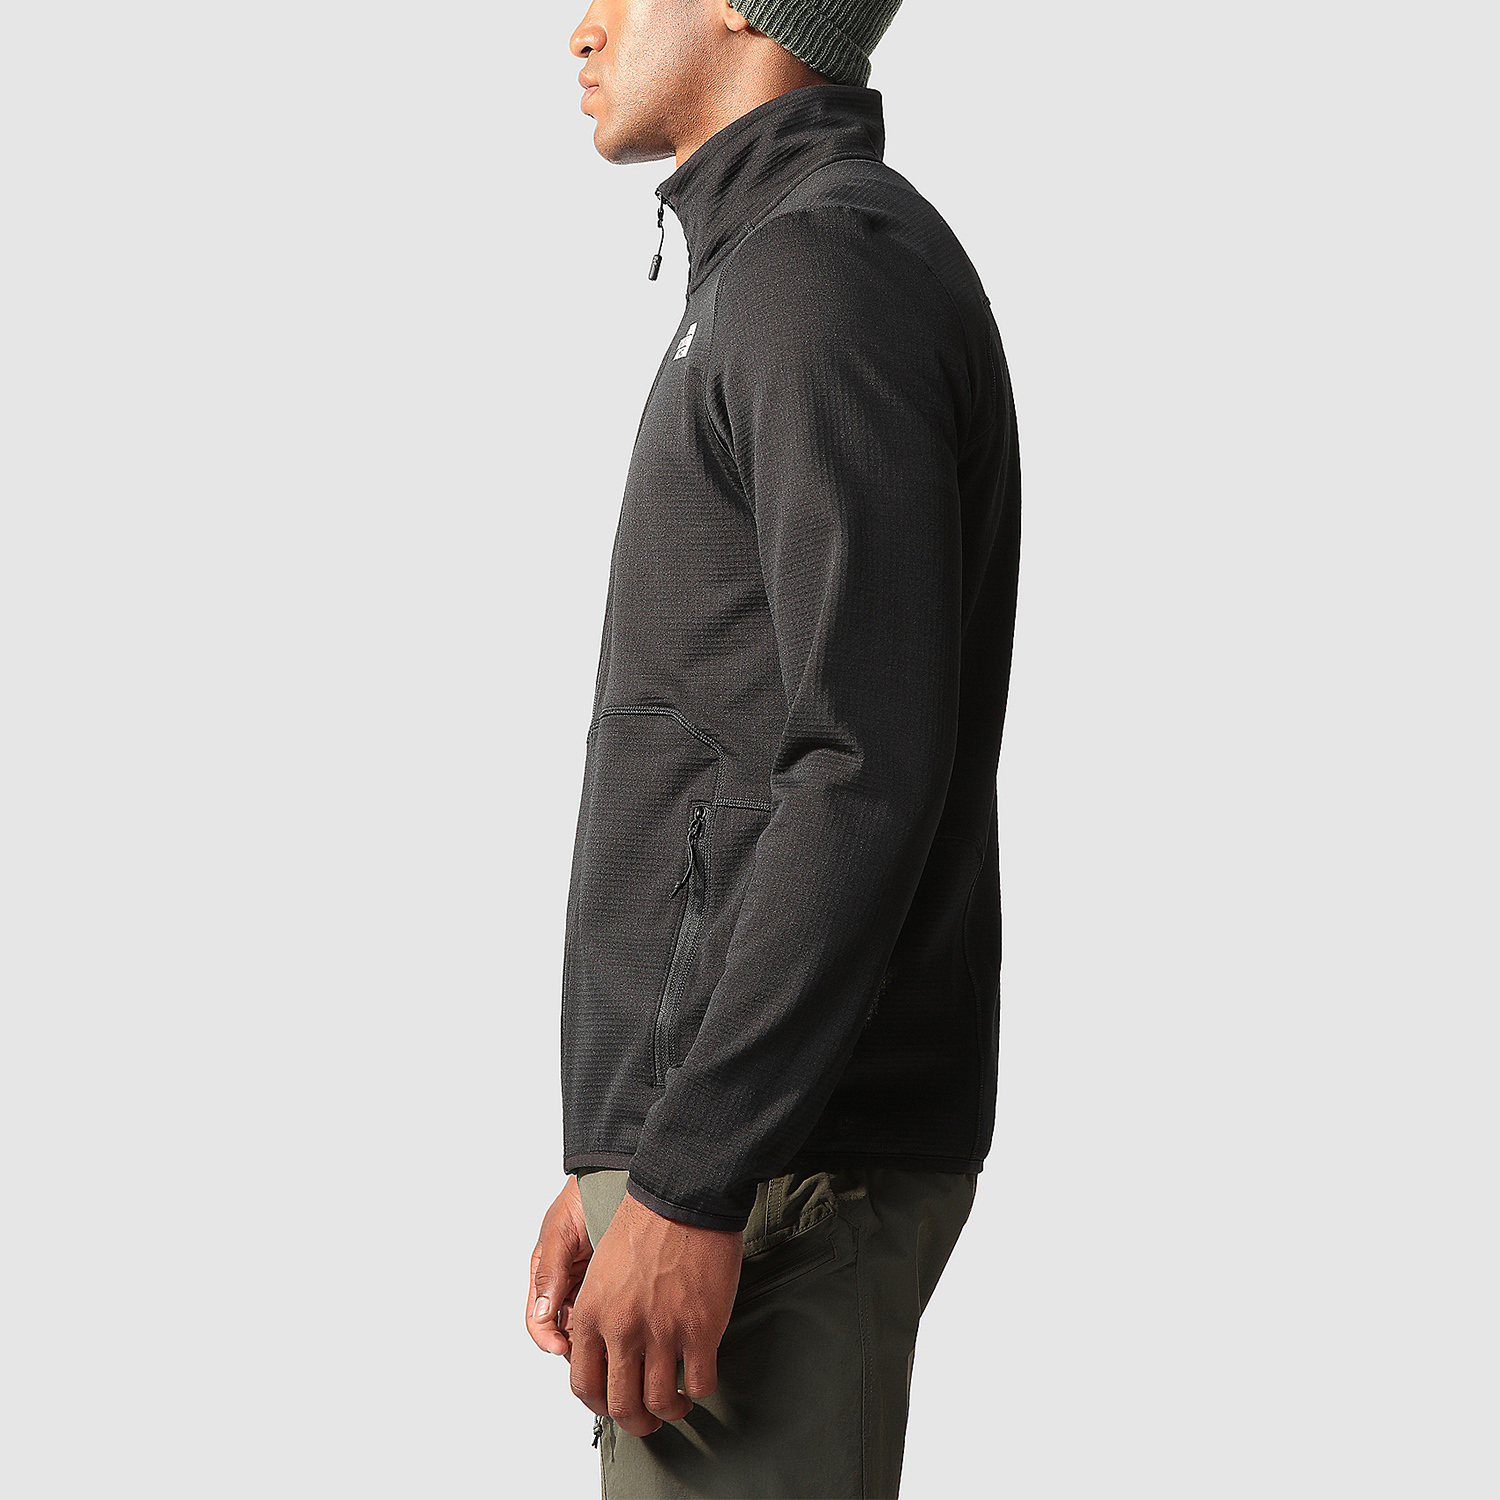 The North Face Quest Jacket - Tnf Black